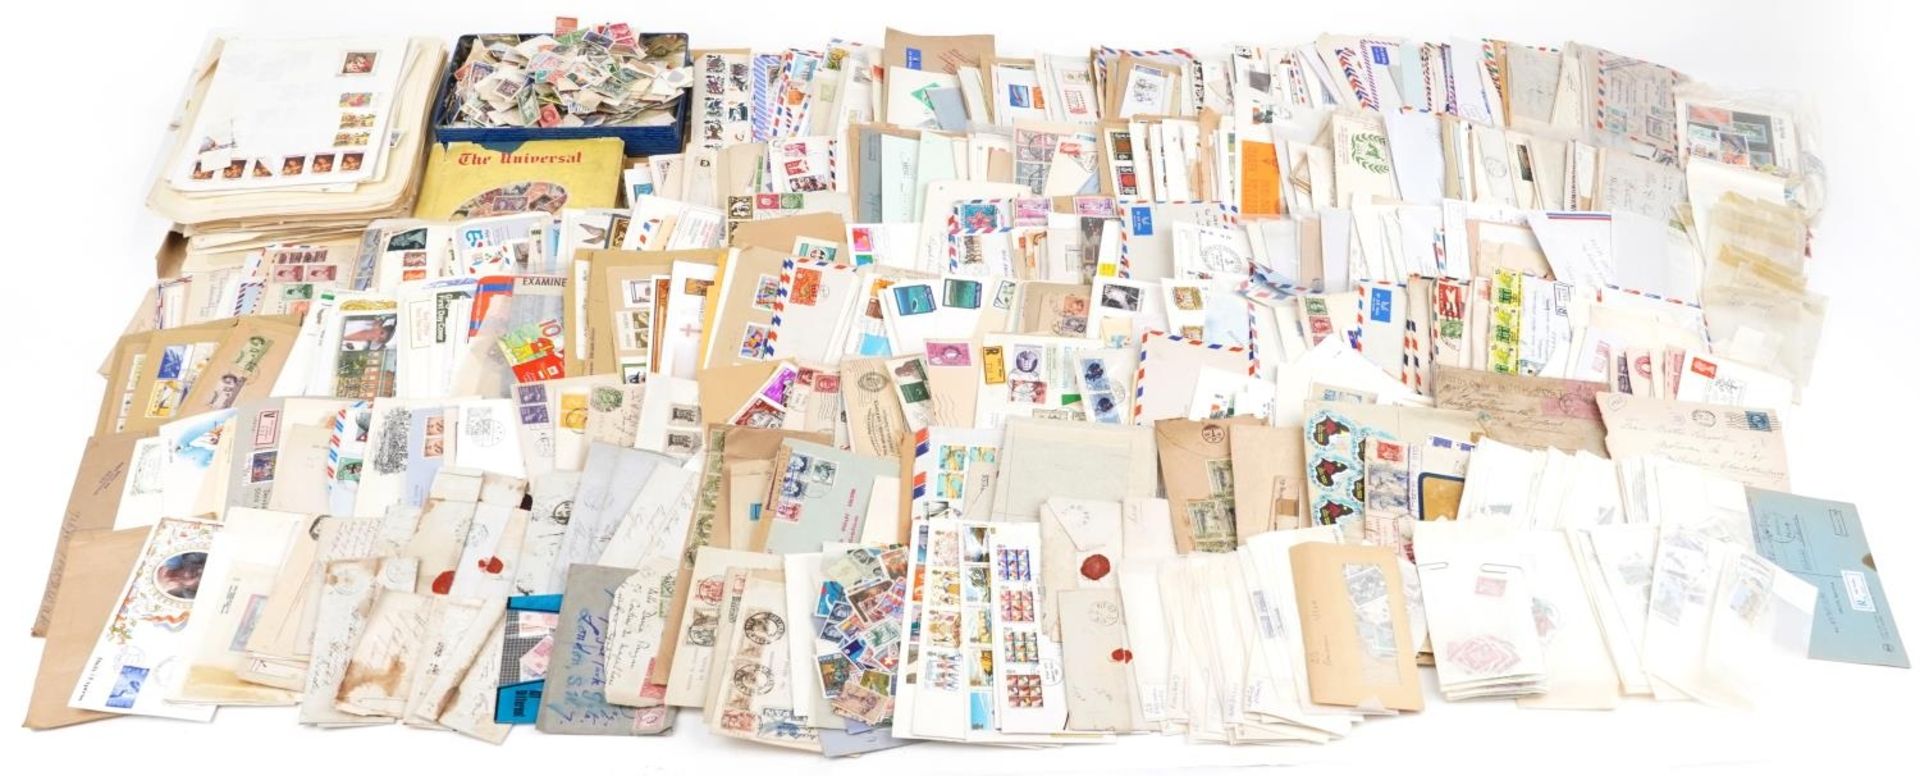 Extensive collection of British and world stamps, covers and postal history, some arranged on sheets